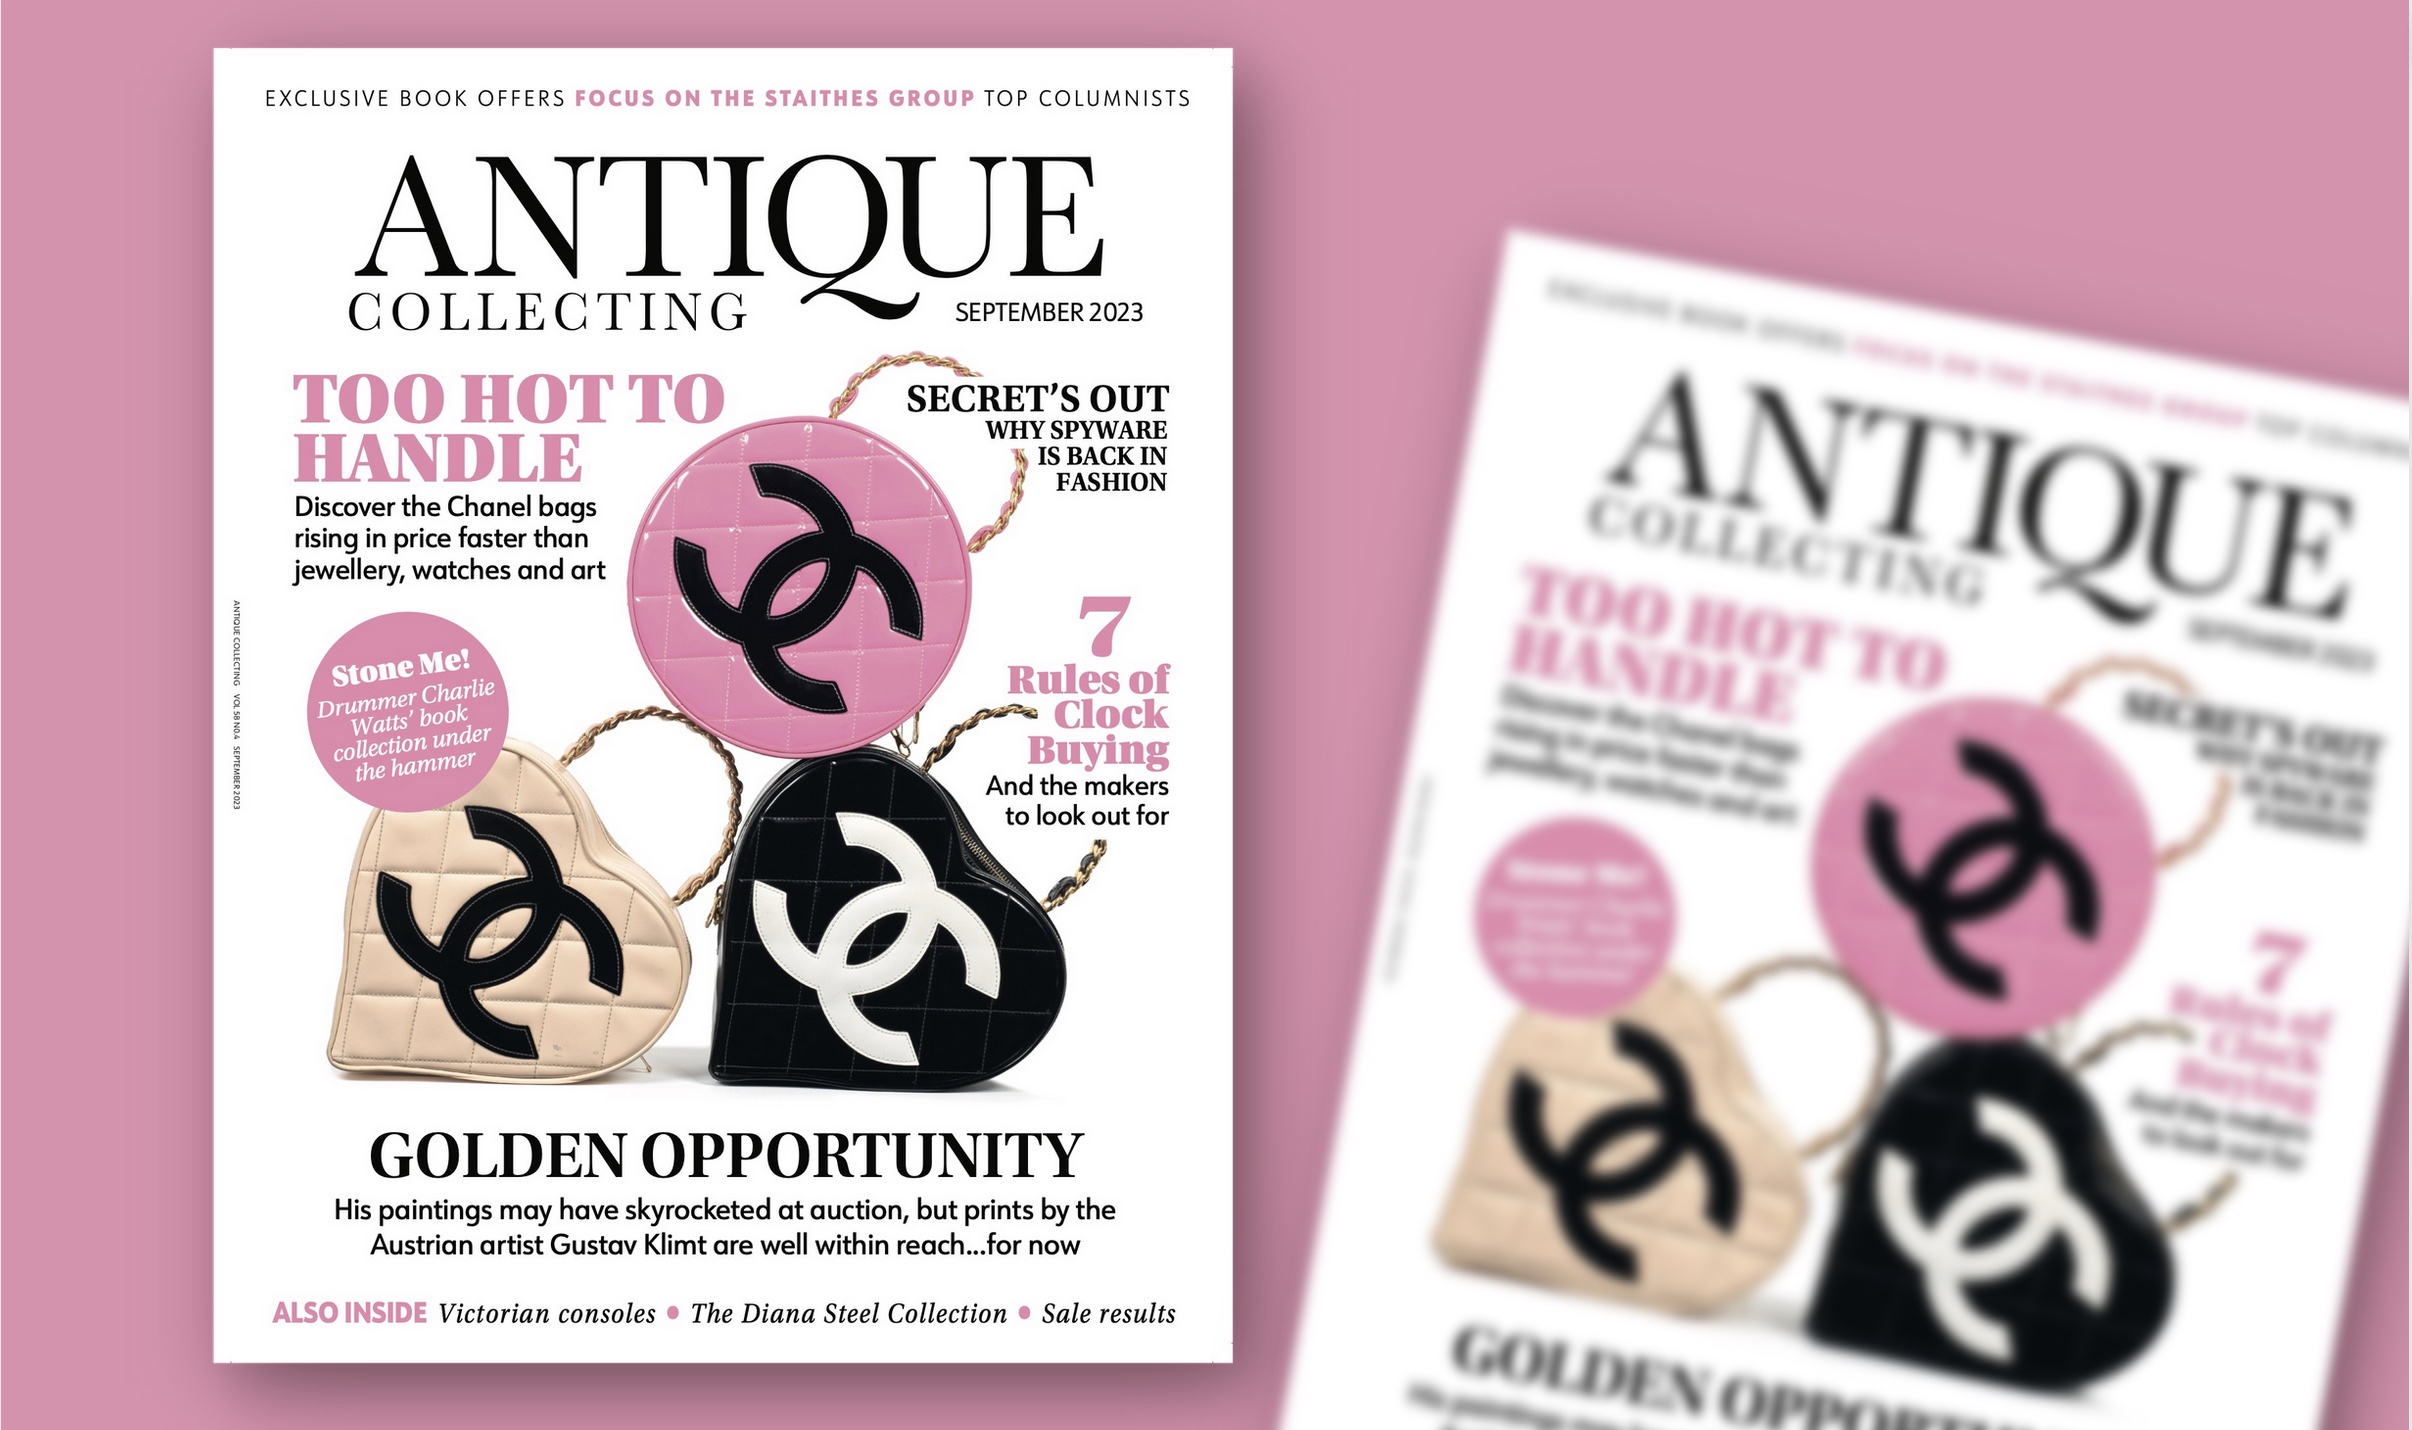 Antique Collecting magazine – new issue out soon – Antique Collecting